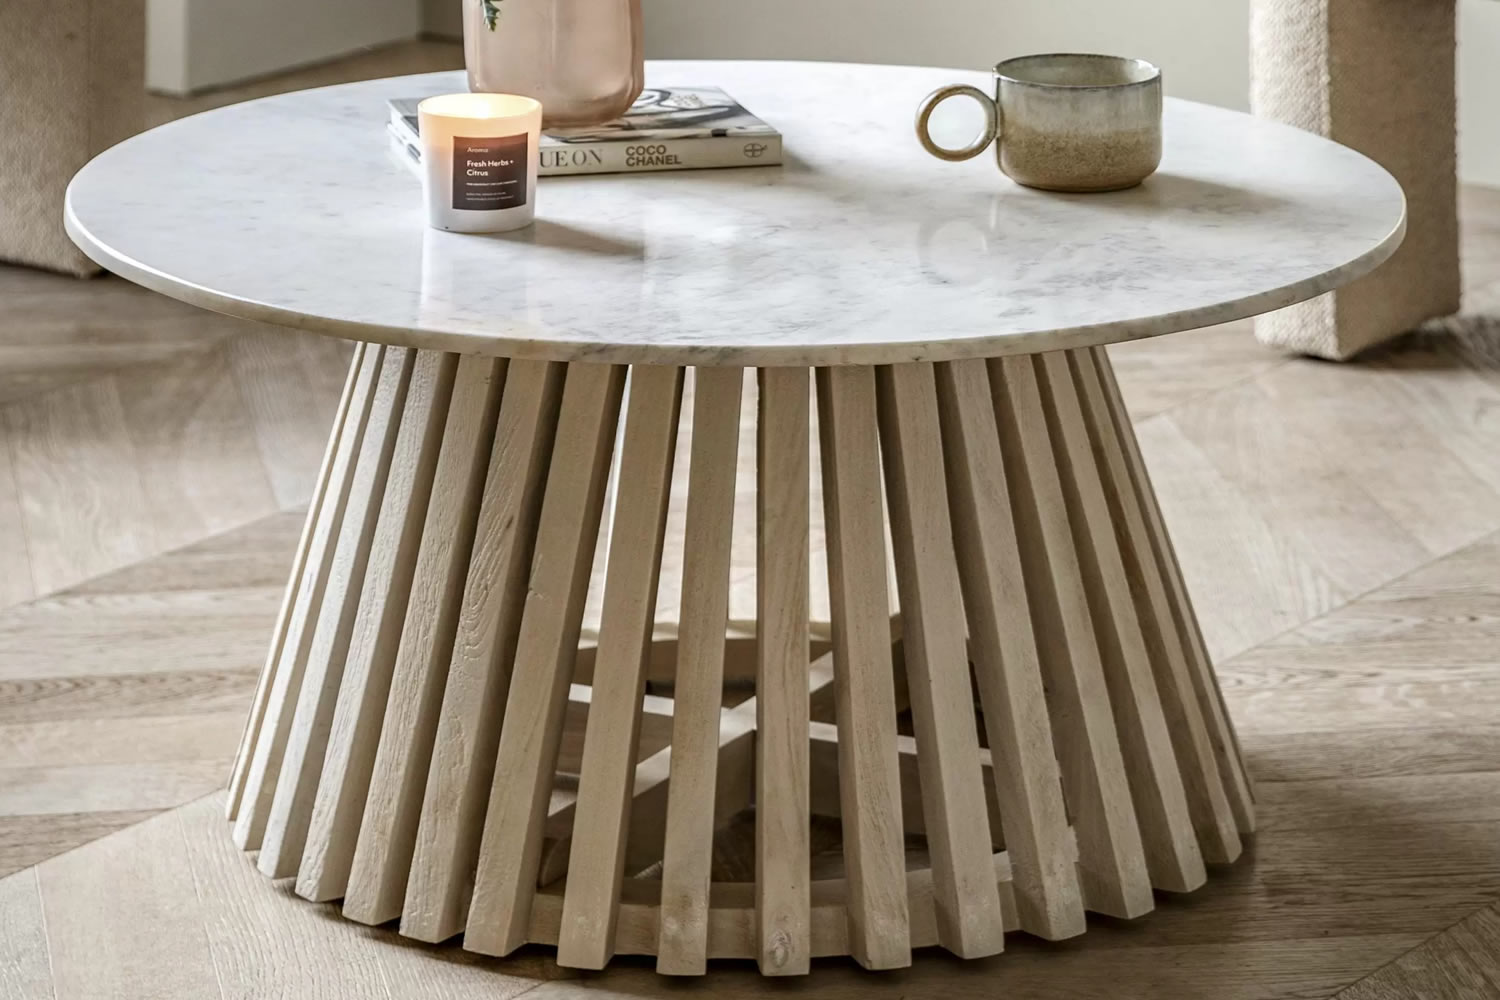 View Soho Round Coffee Table Robust Mango Wood Slatted Base Modern Design Practical White Marble Top Easy Assembly Matching Pieces Available information